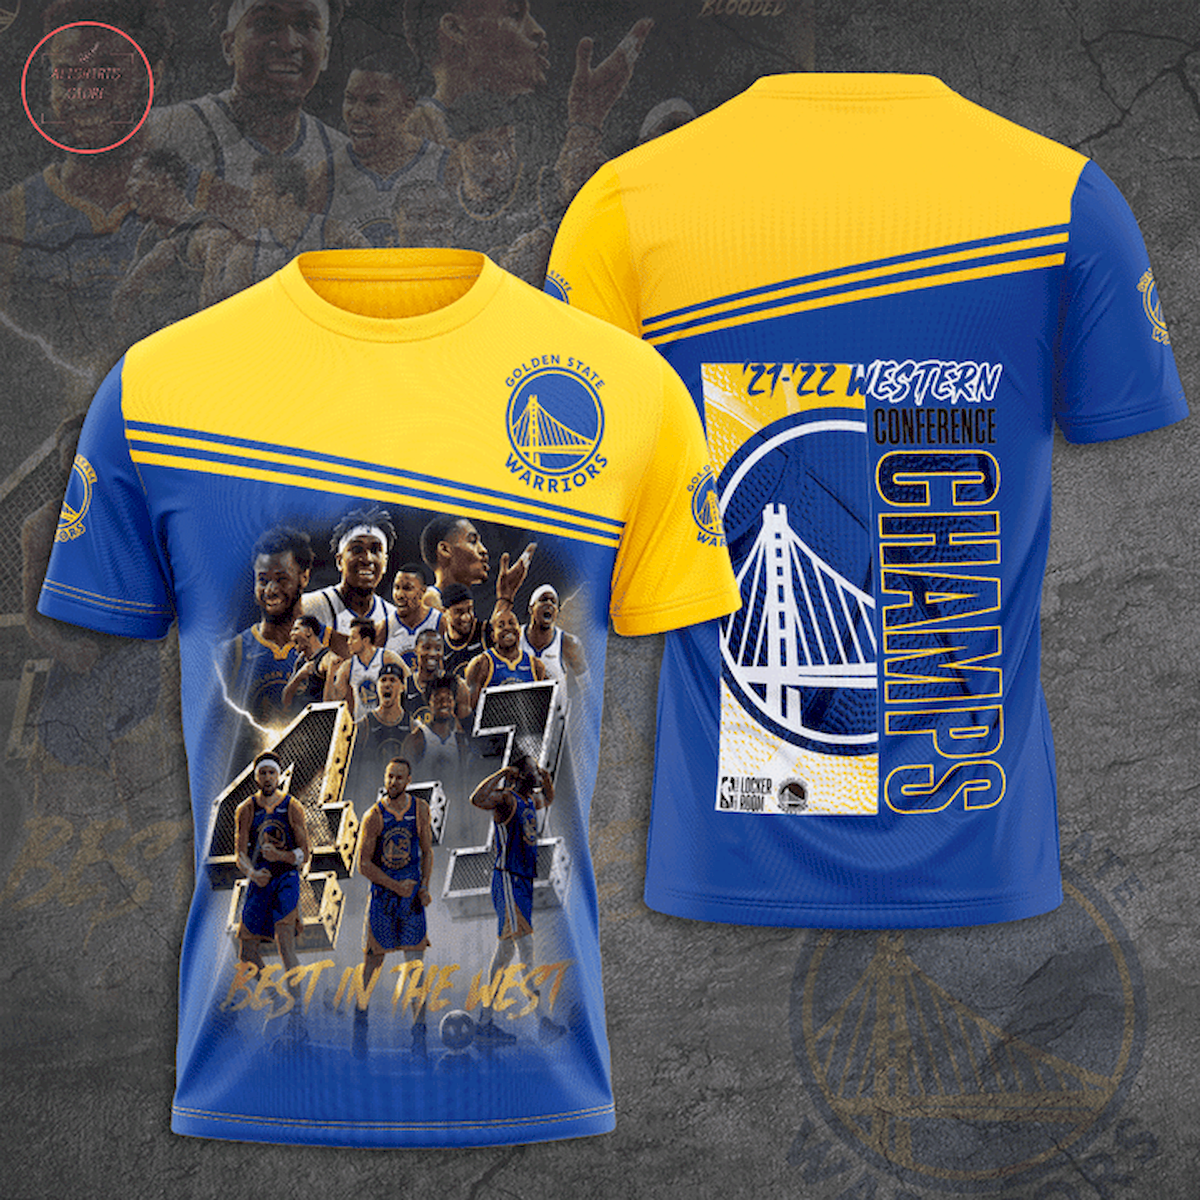 Golden State Warriors 21 22 Western Conference Champions T-Shirt 3d